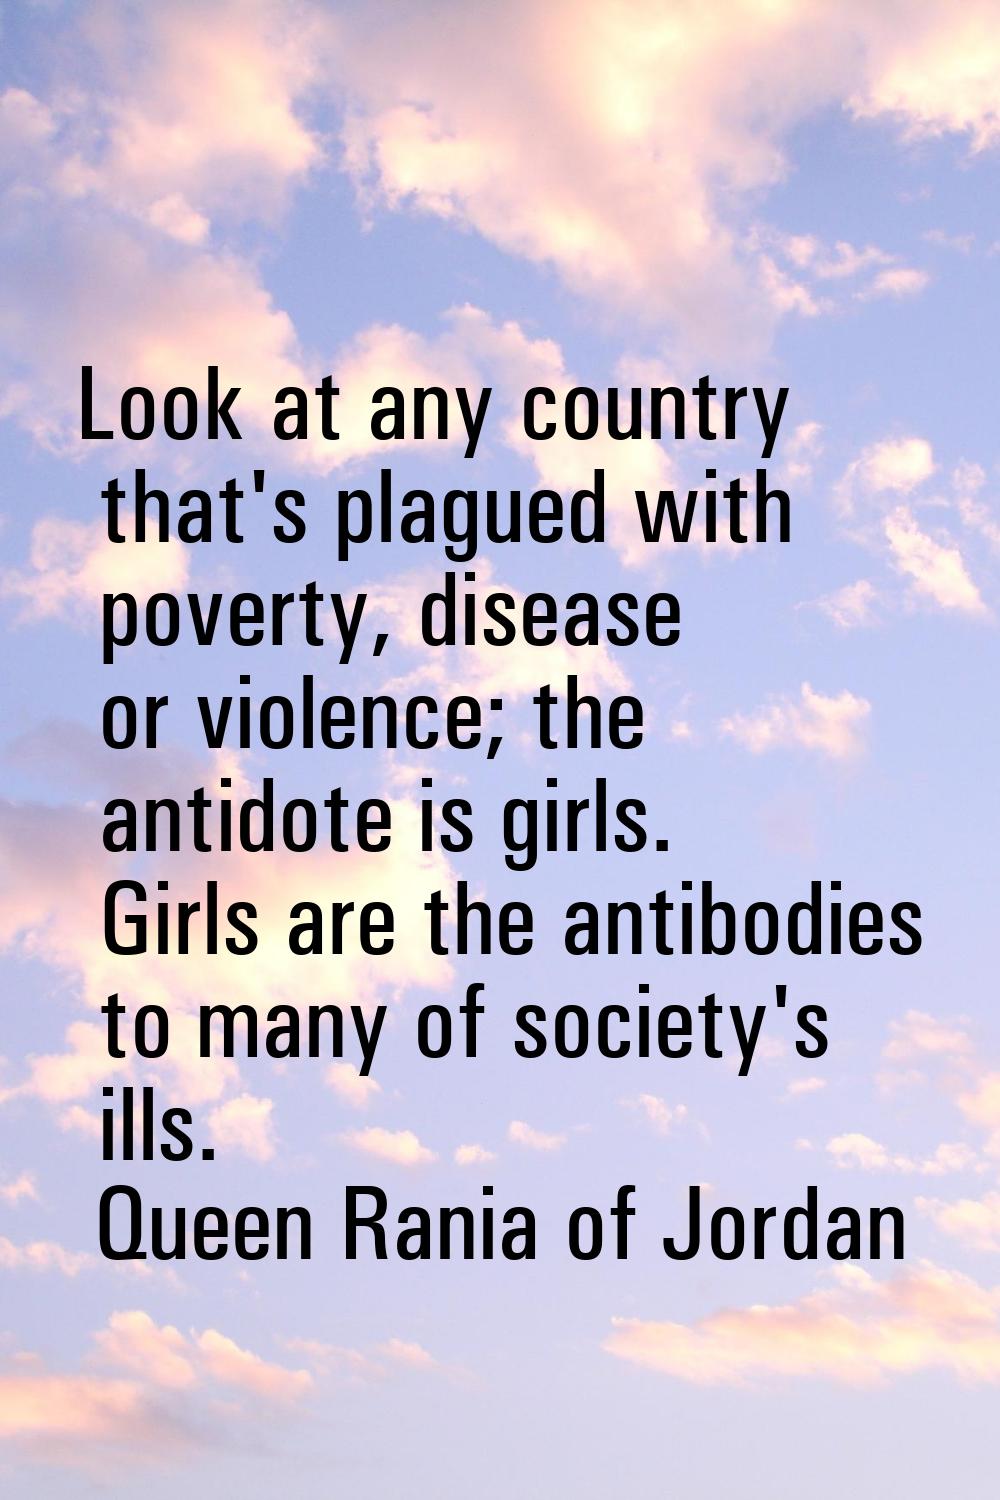 Look at any country that's plagued with poverty, disease or violence; the antidote is girls. Girls 